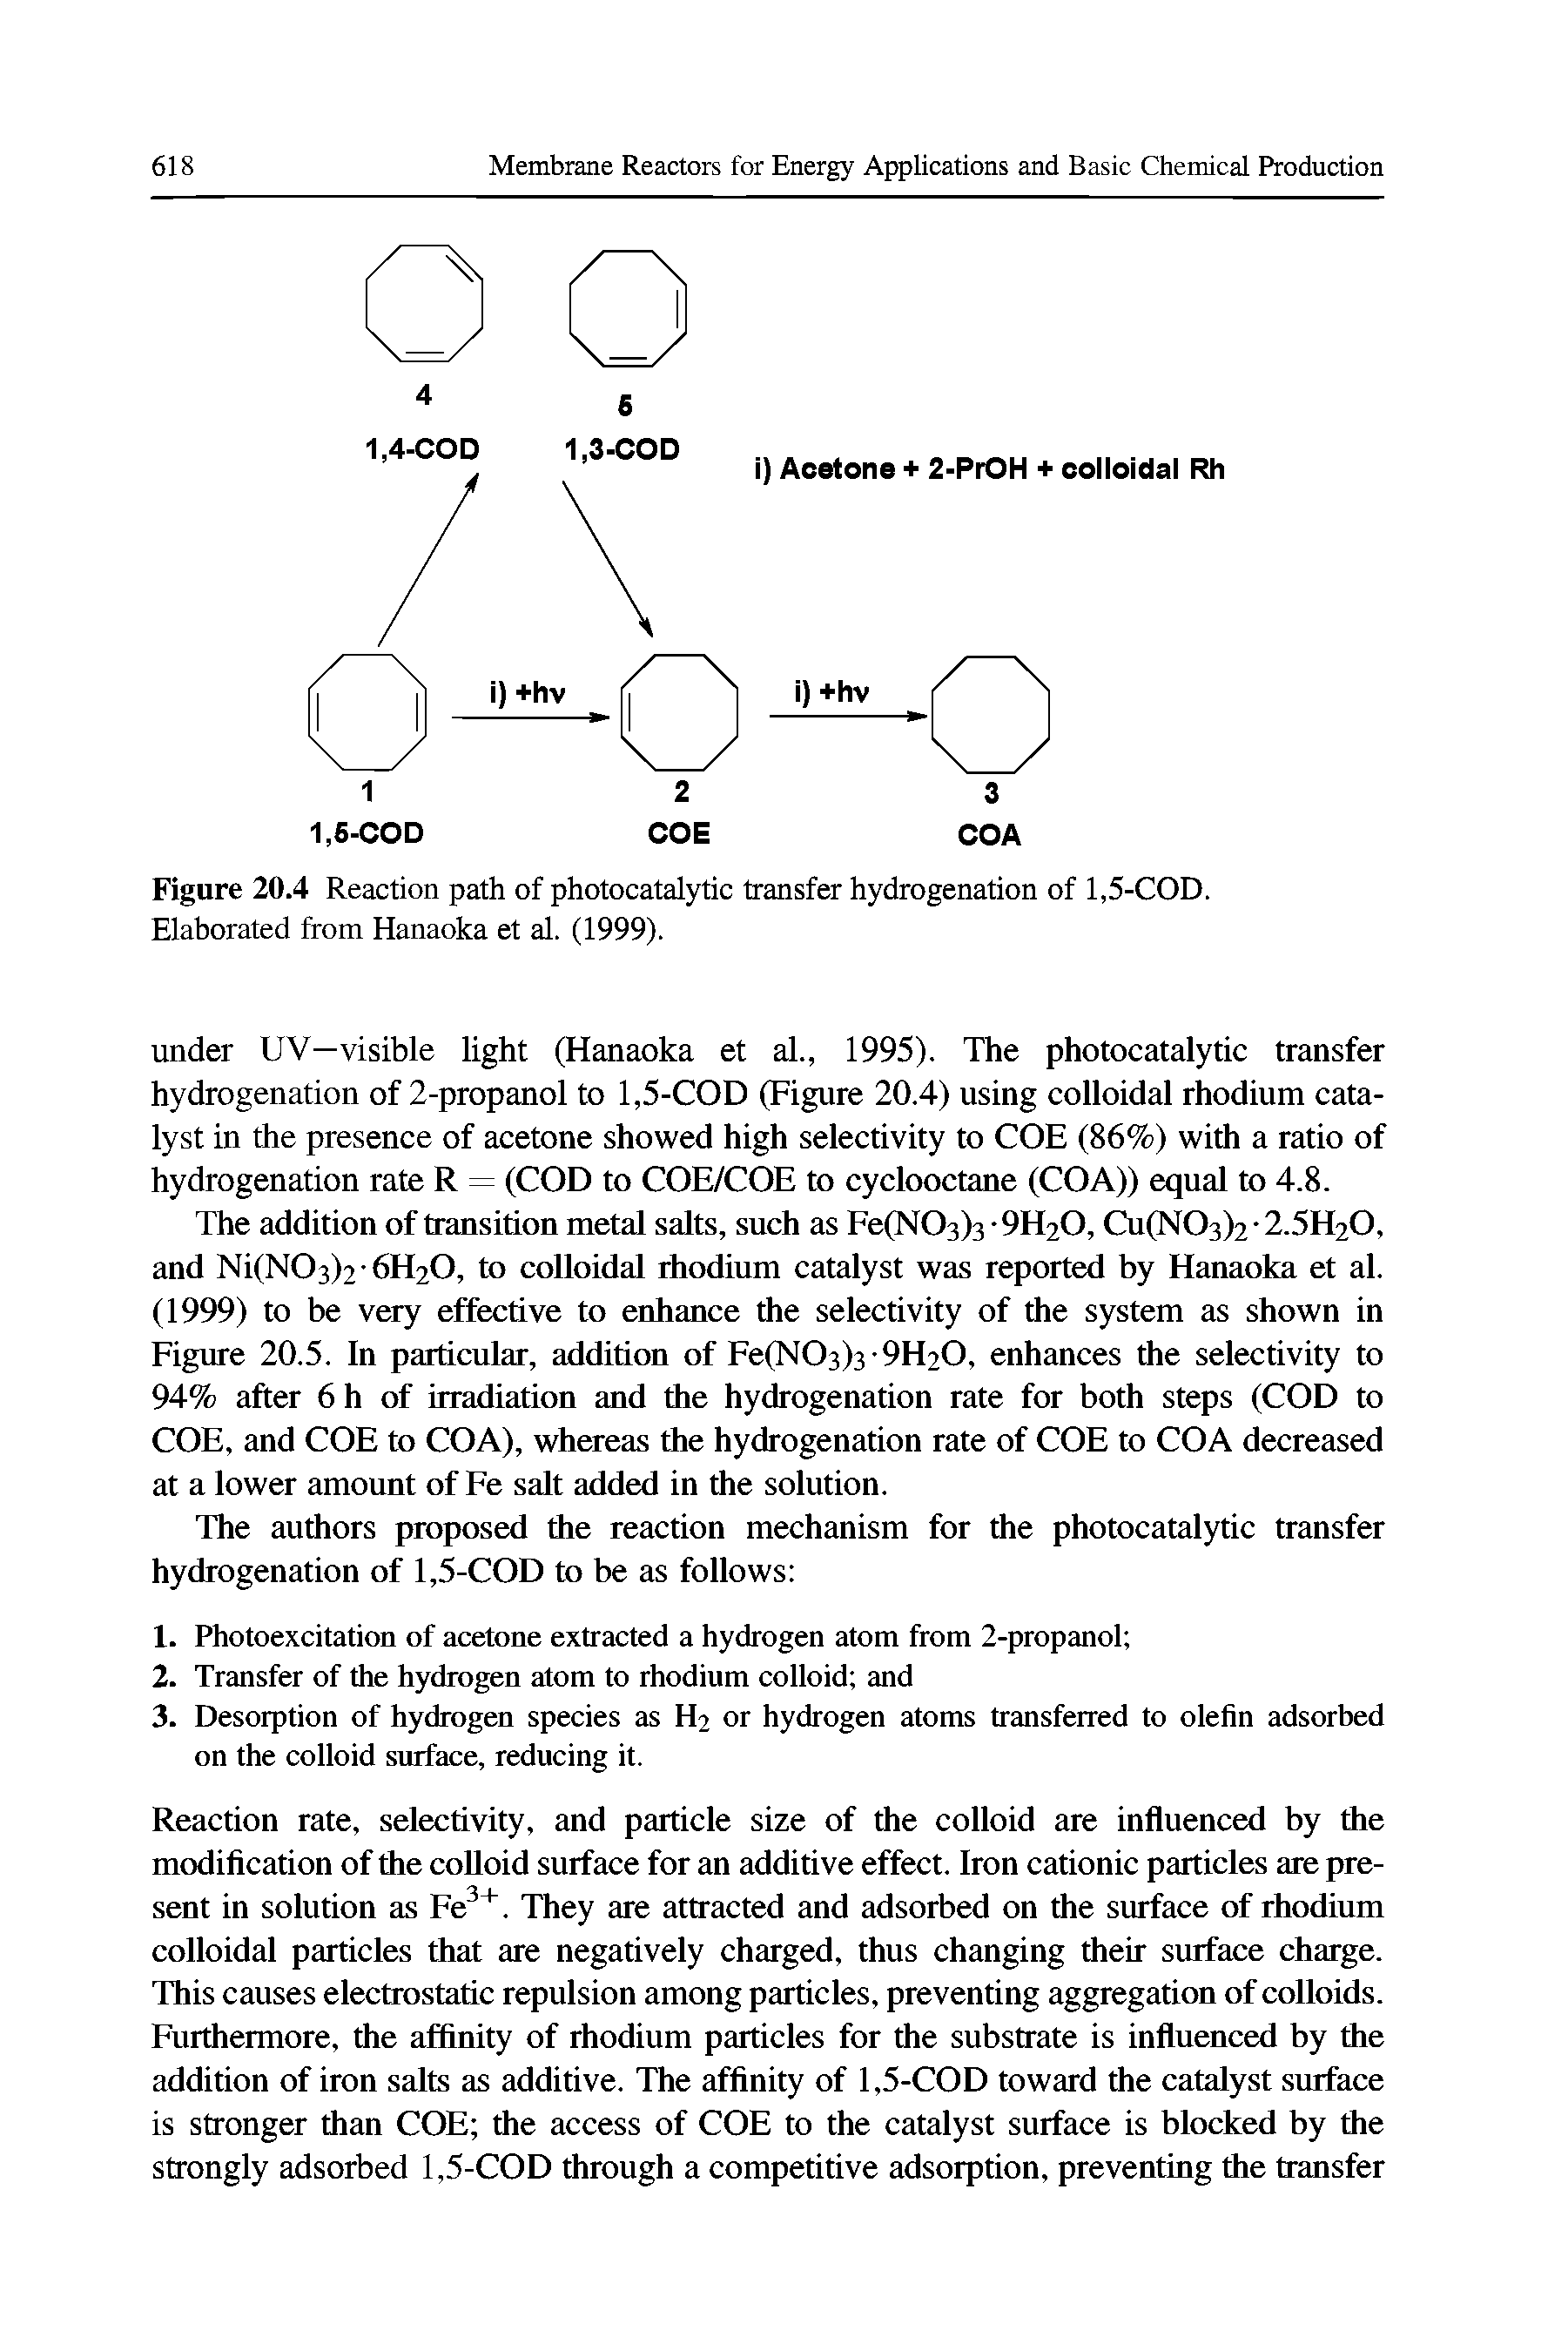 Figure 20.4 Reaction path of photocatalytic transfer hydrogenation of 1,5-COD.